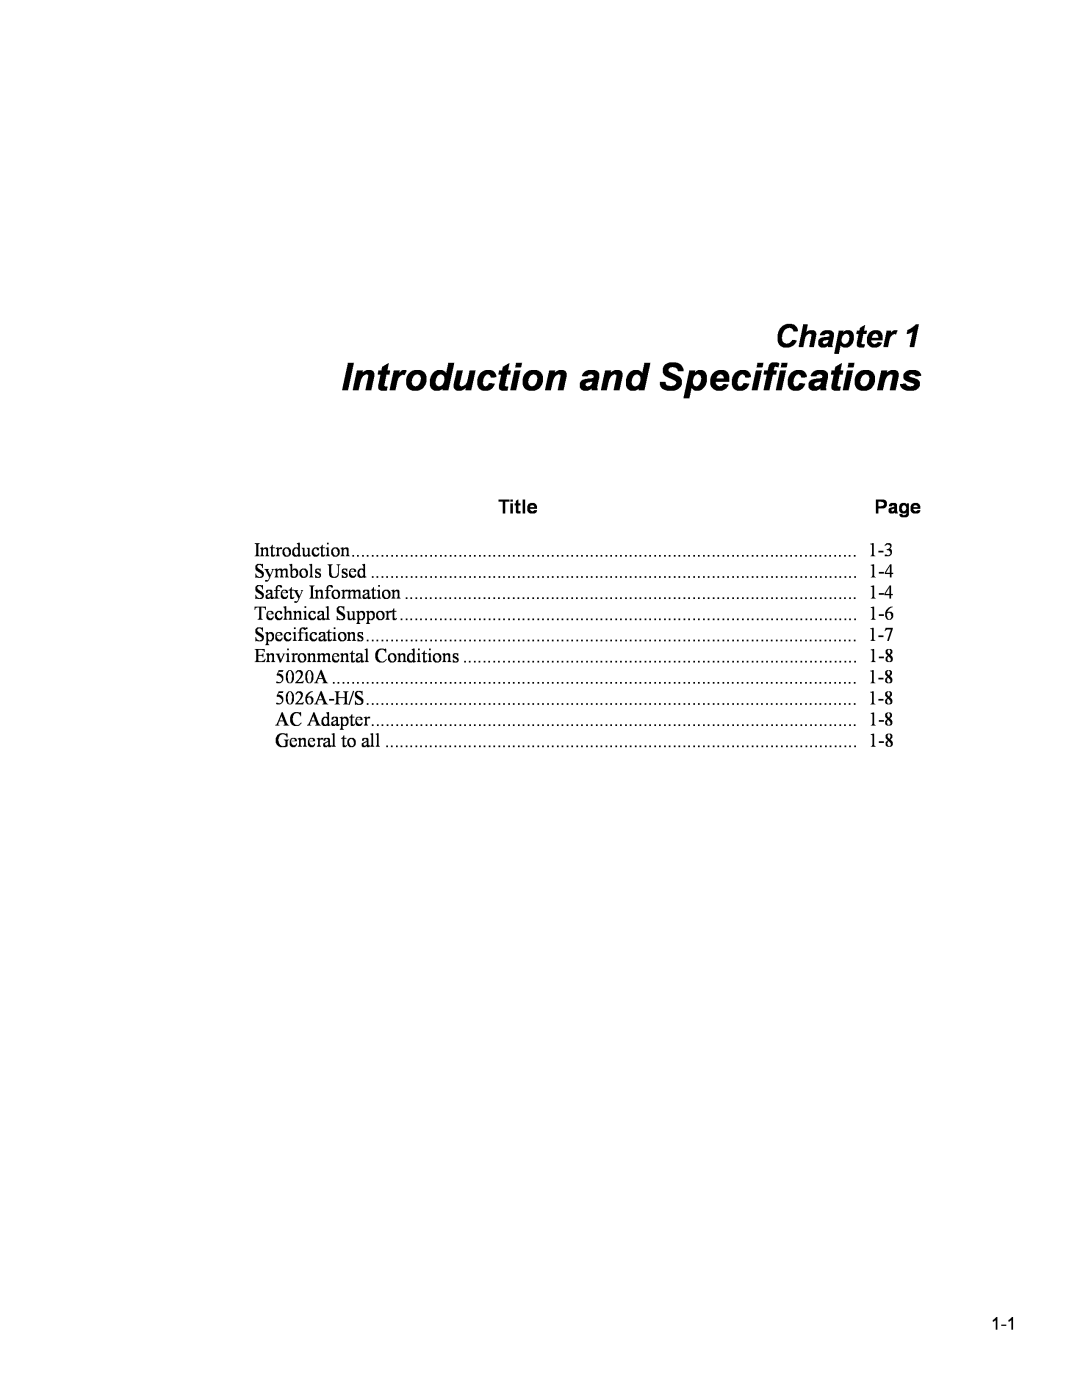 Fluke 5020A user manual Introduction and Specifications, Chapter, Title, Page 